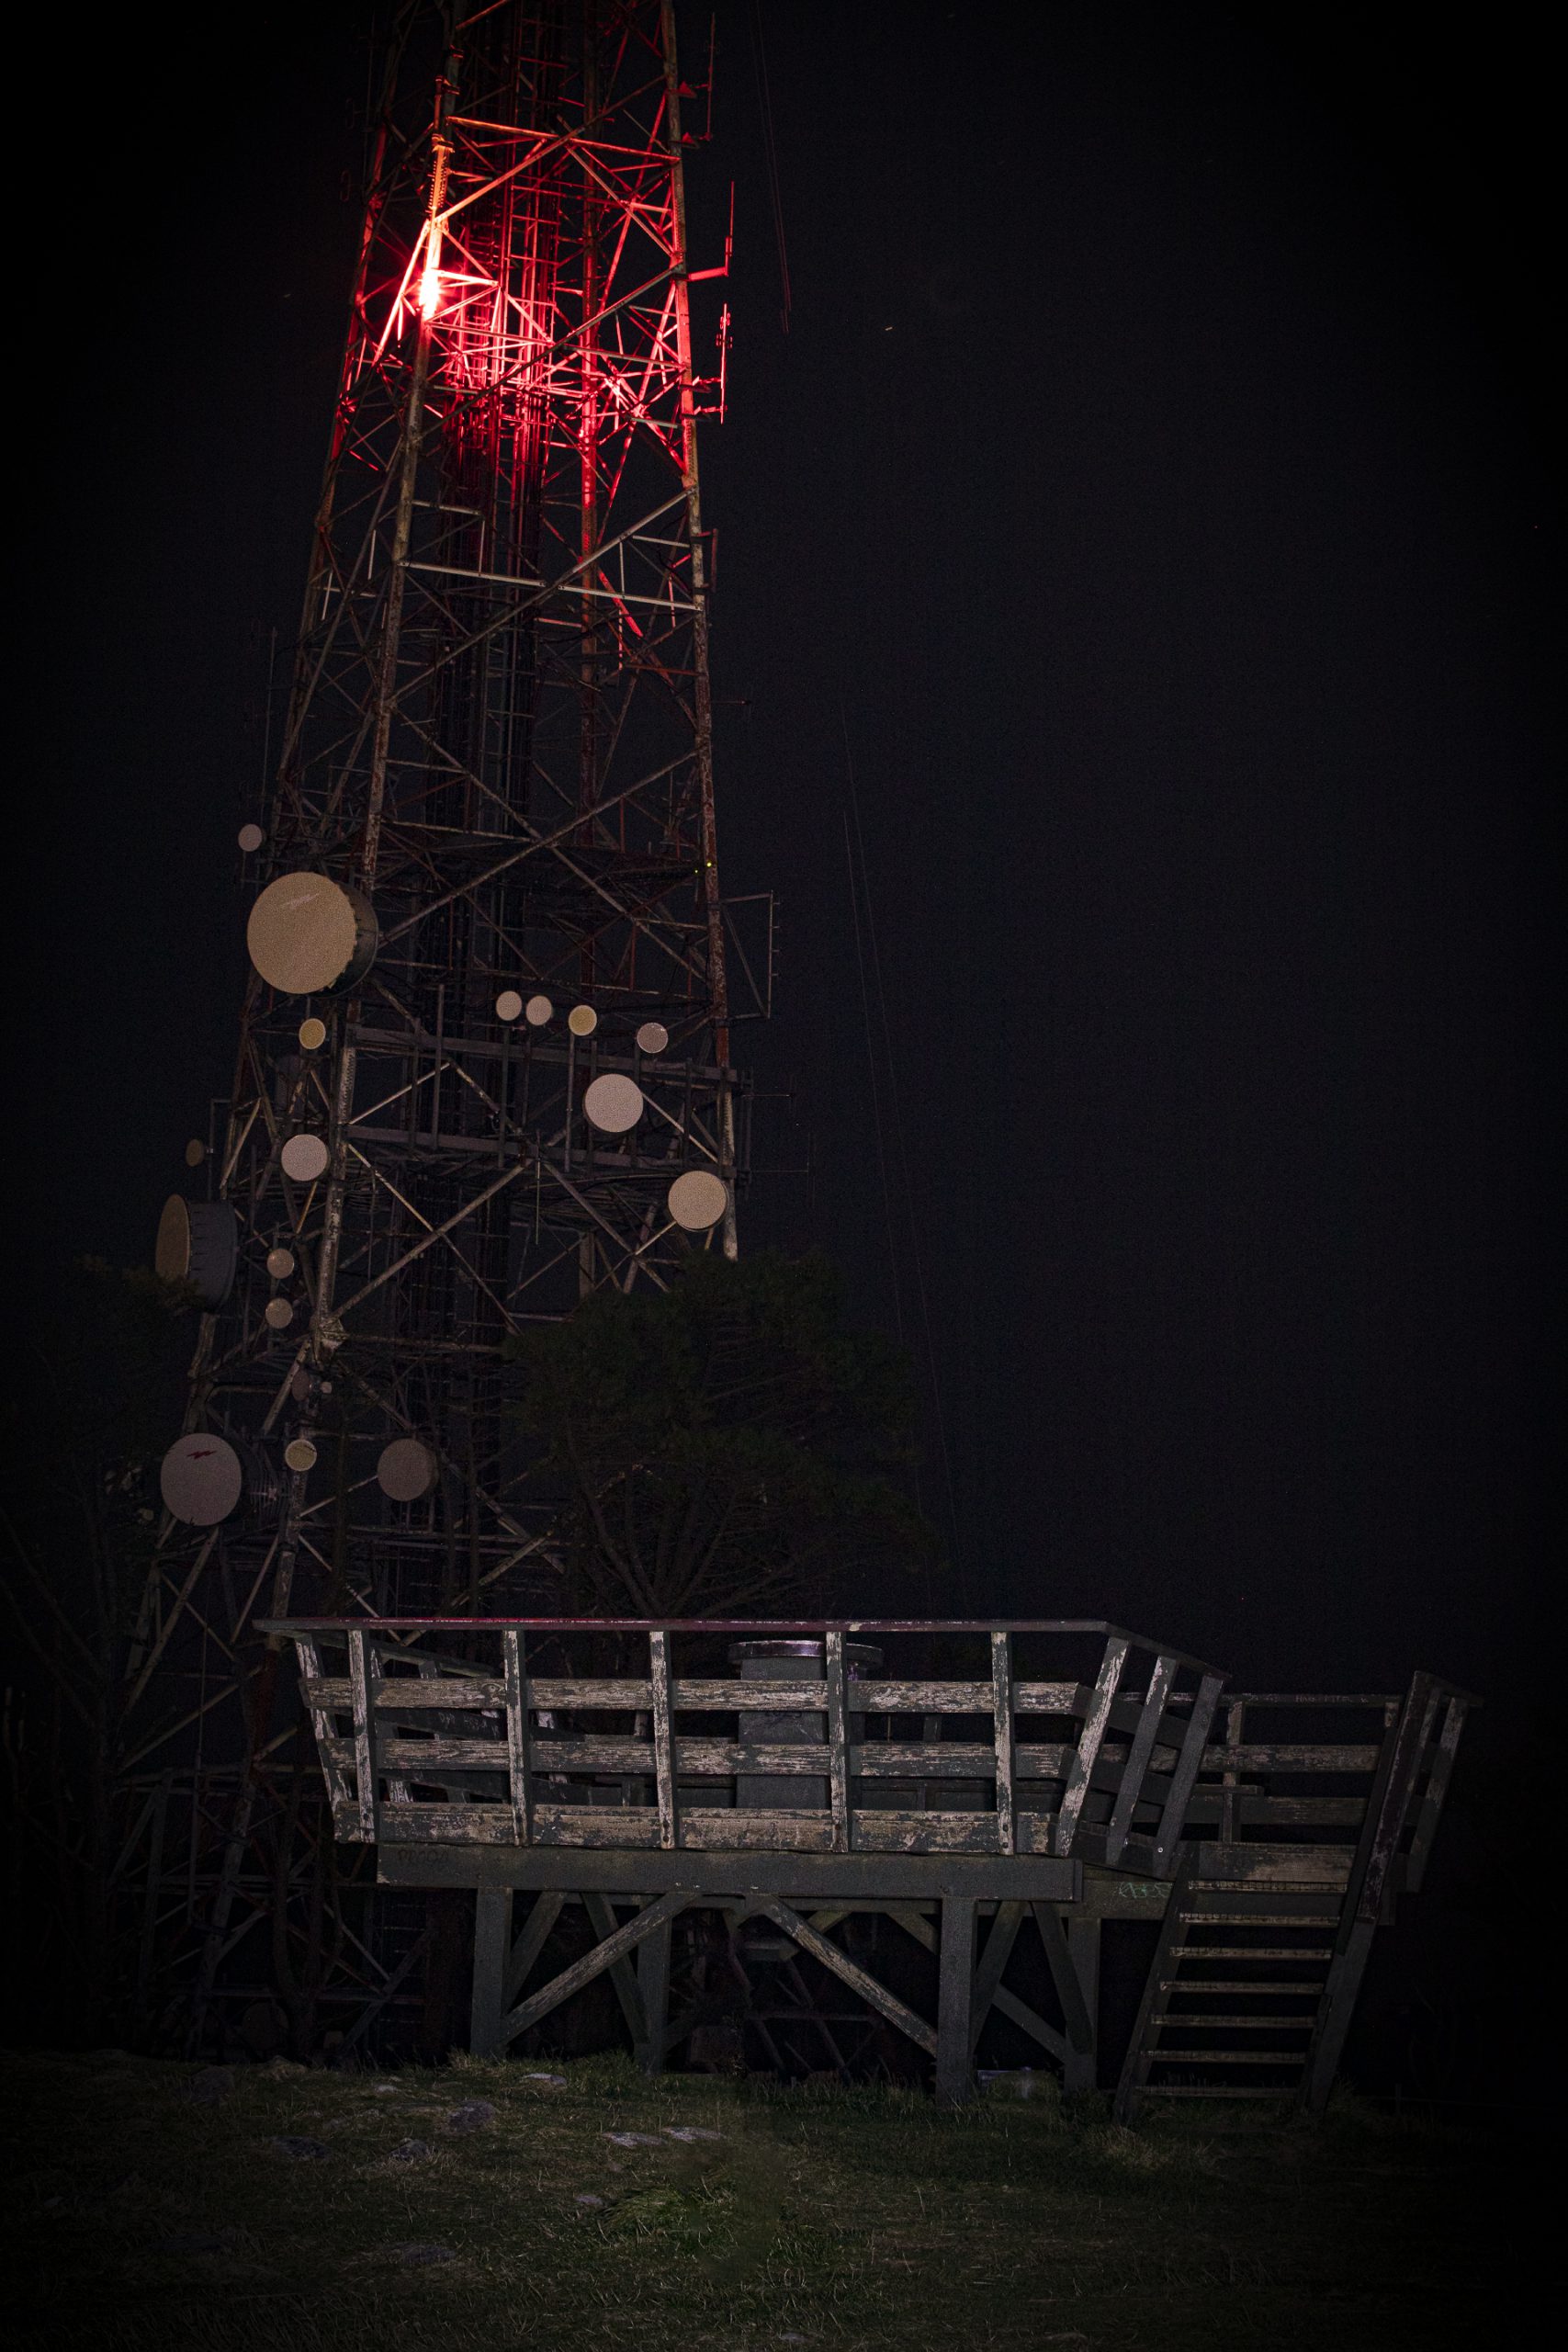 The observation platform and telecoms tower on Kaukau at night.